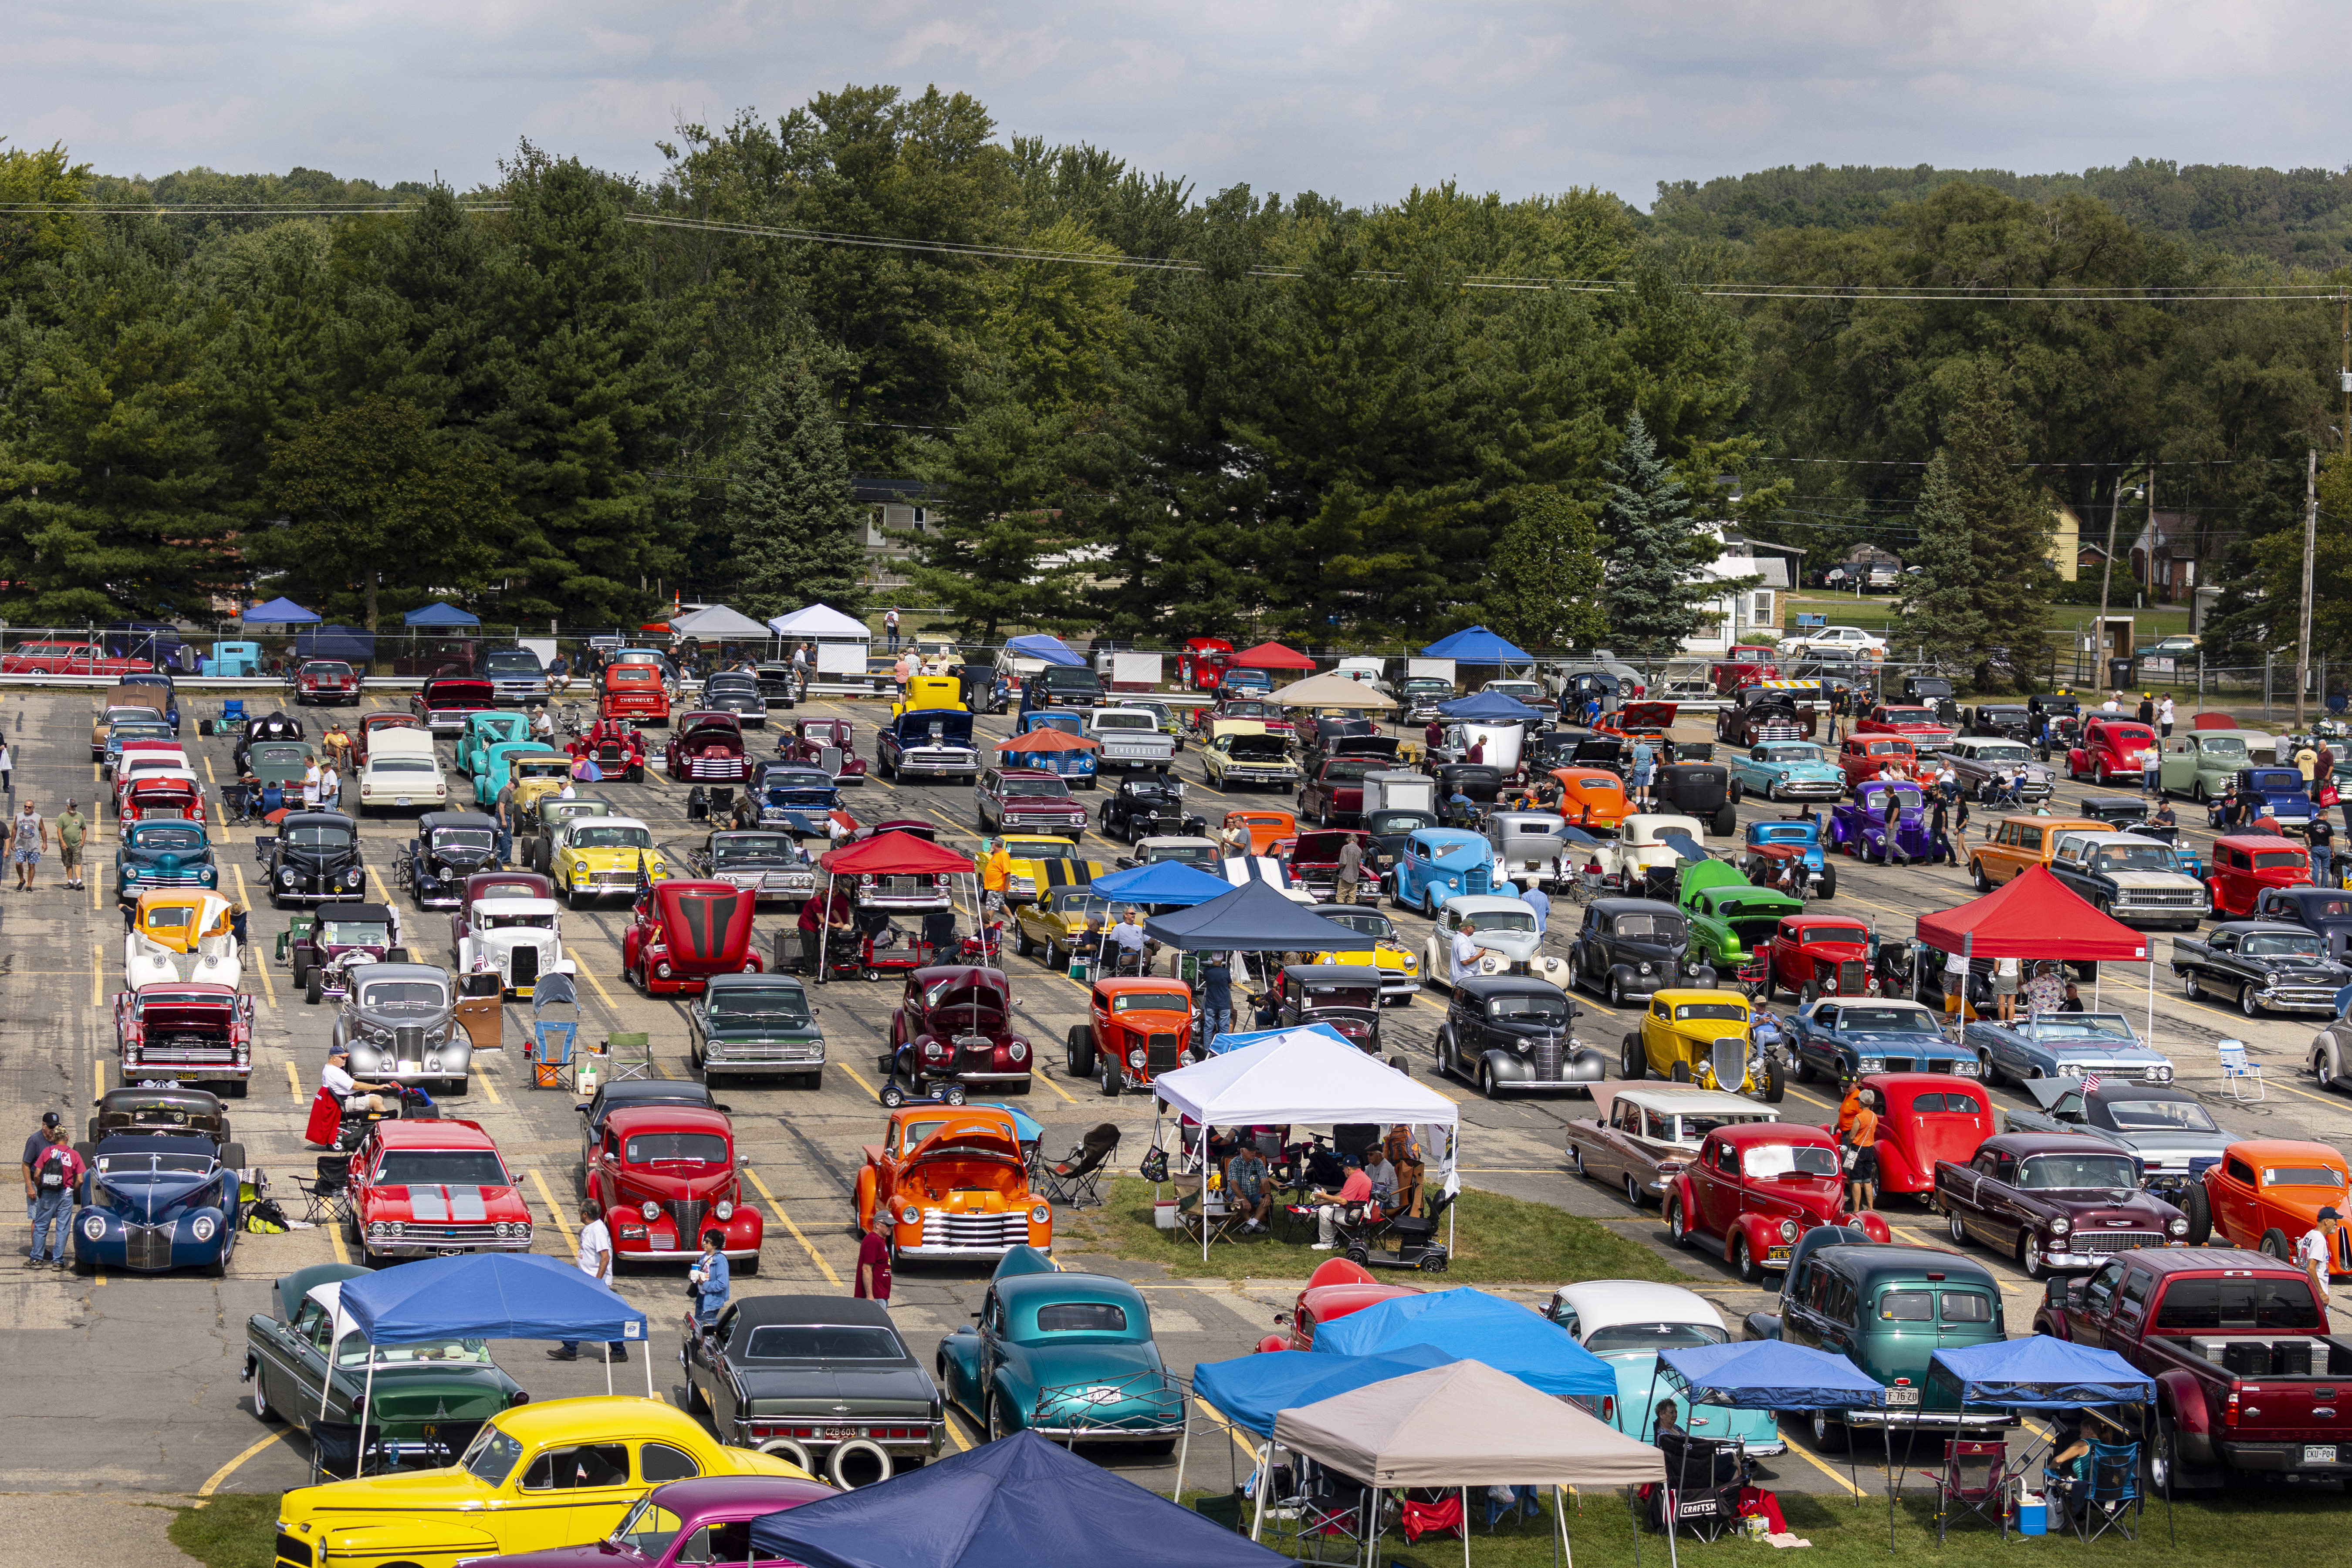 See hot rods take over Kalamazoo for national street rod gathering